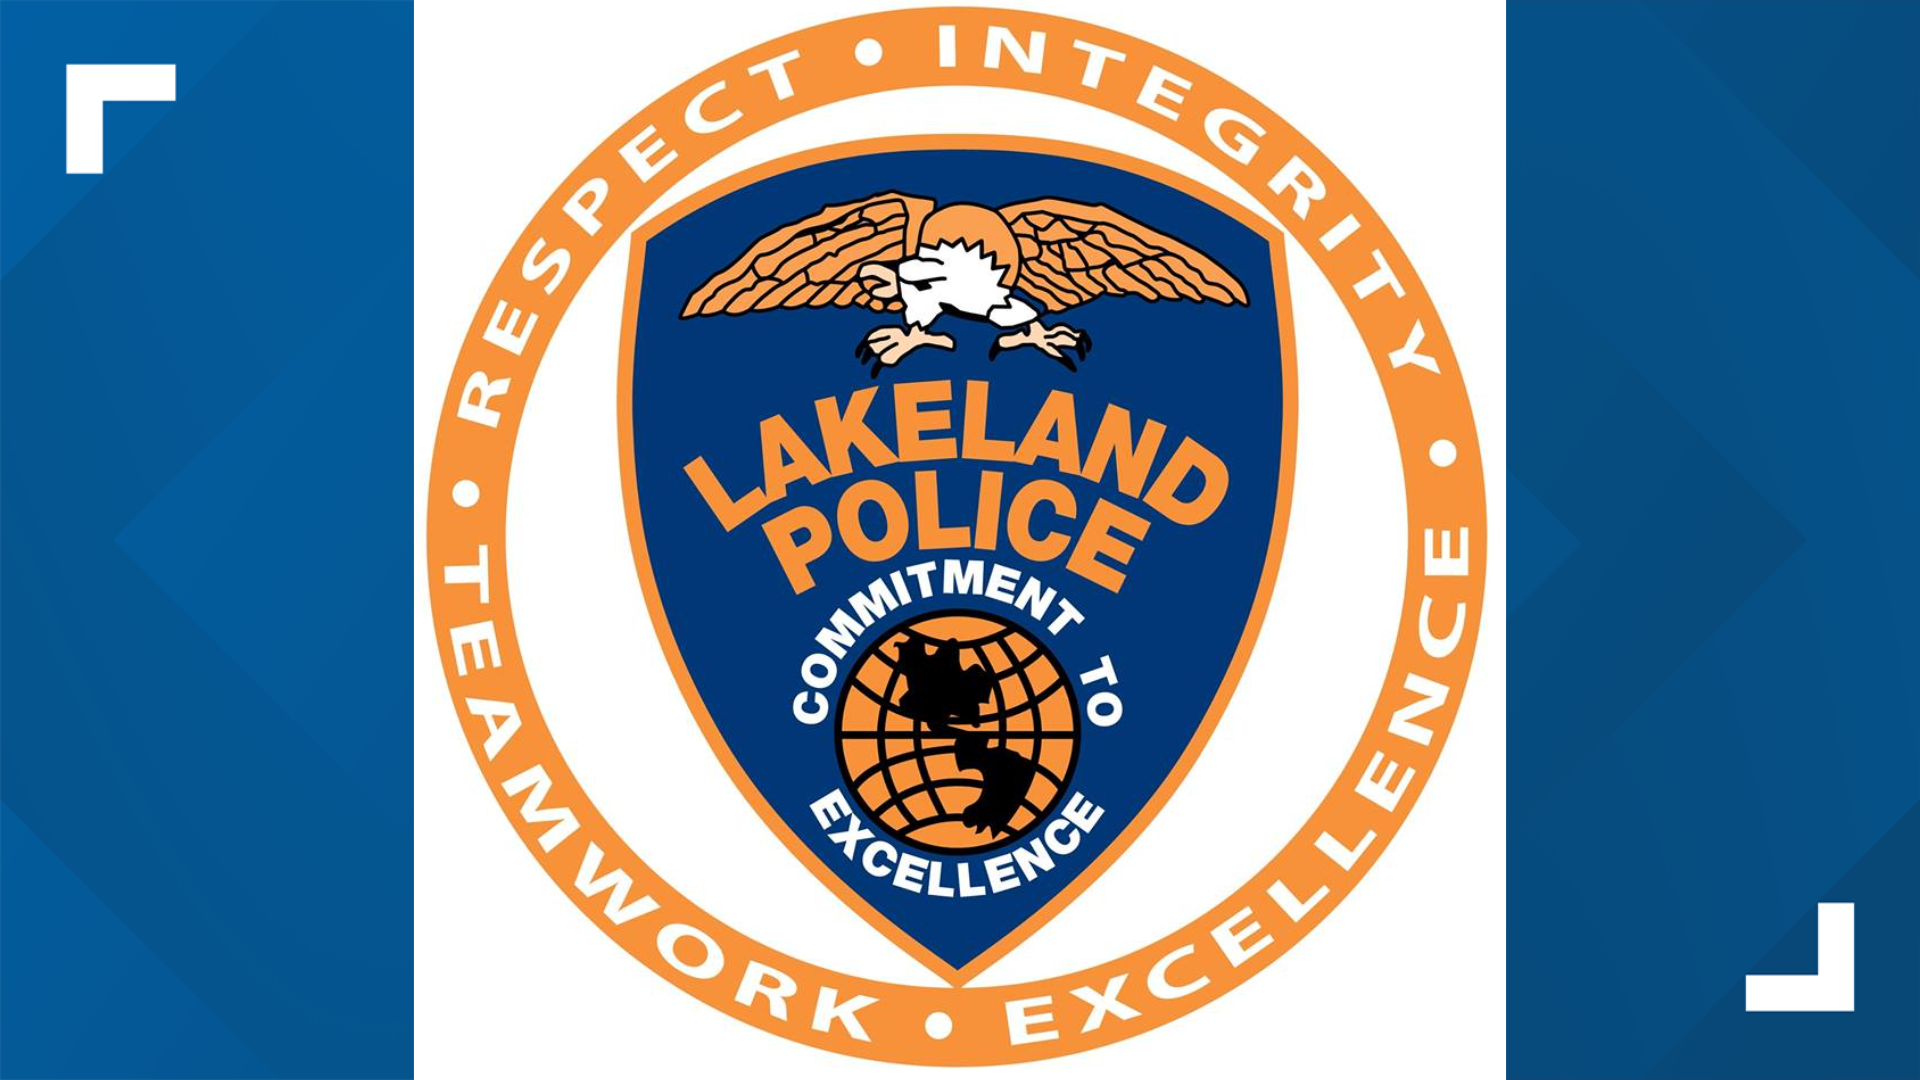 Community activists are speaking out about the instances of alleged police brutality by Lakeland Police.